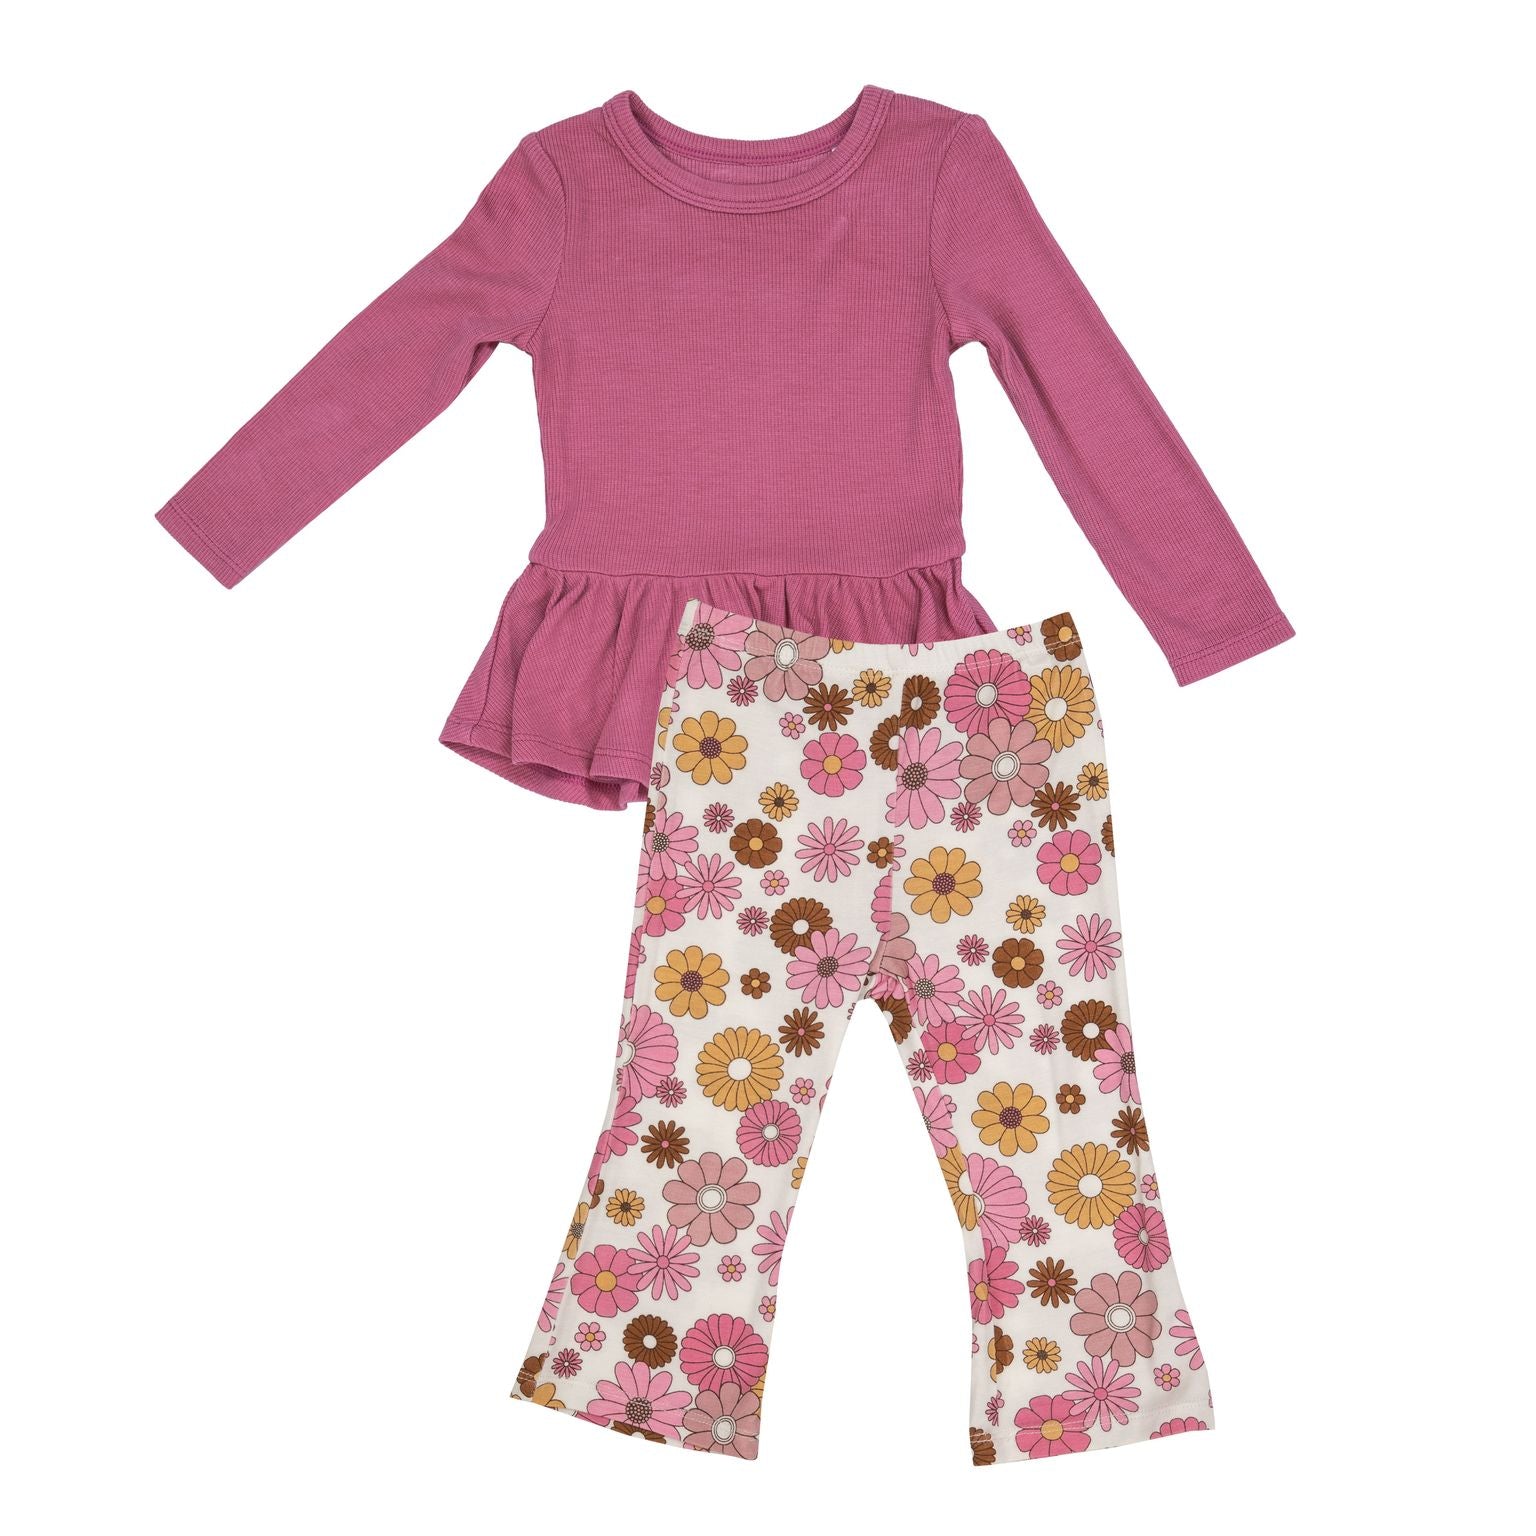 Ribbed Chateau Rose Peplum Top & Retro Floral Flare Pant - Twinkle Twinkle Little One